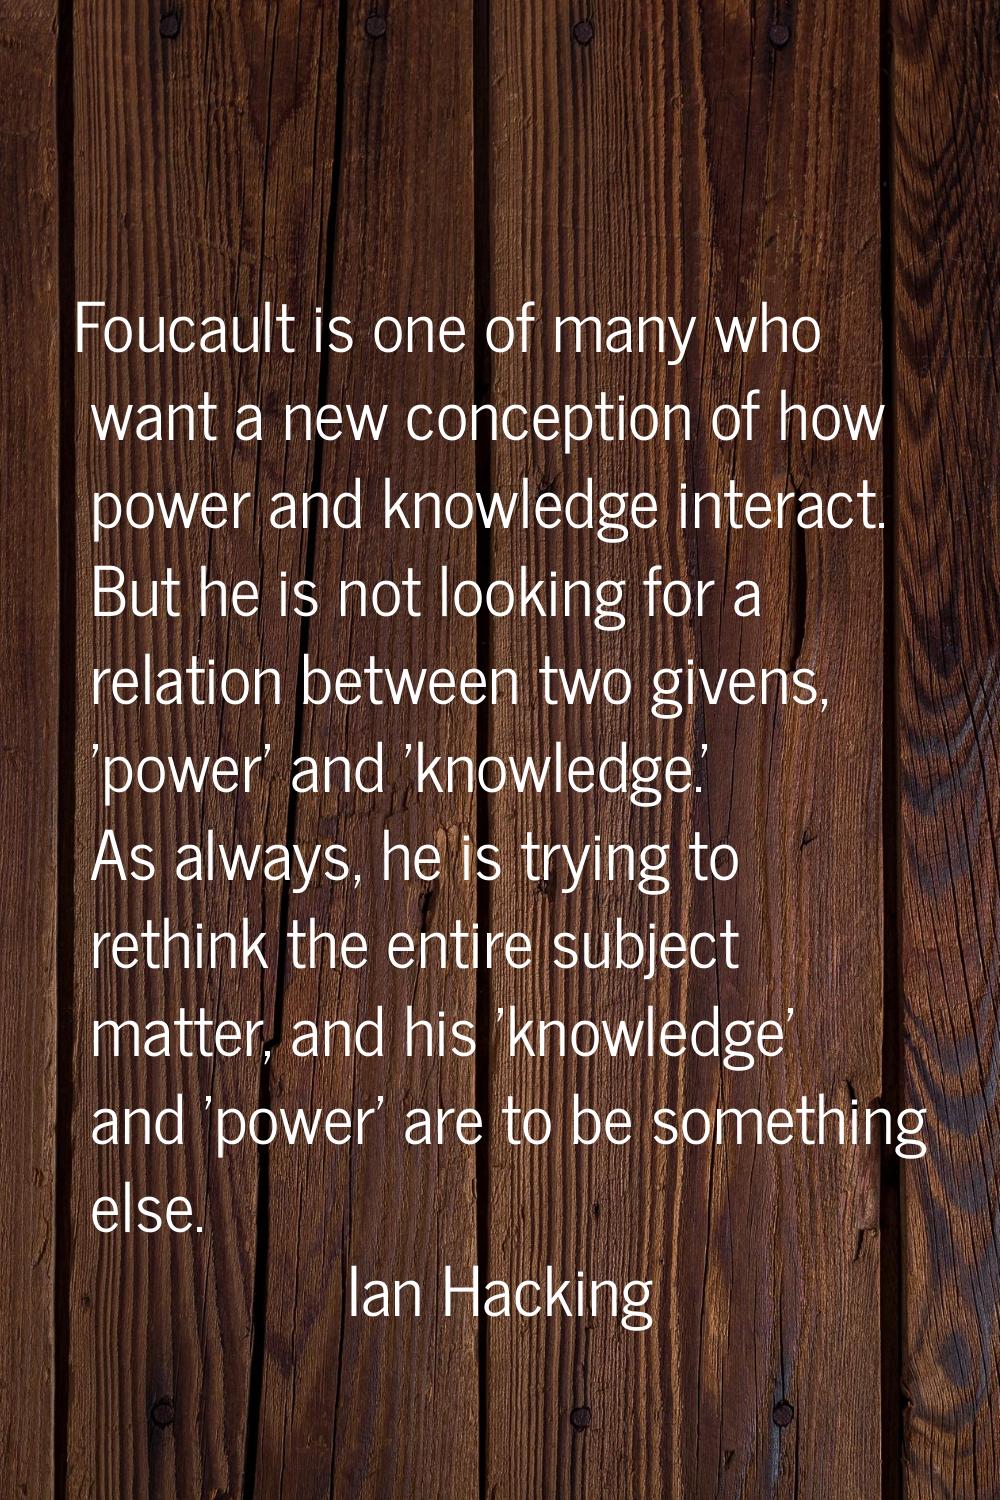 Foucault is one of many who want a new conception of how power and knowledge interact. But he is no